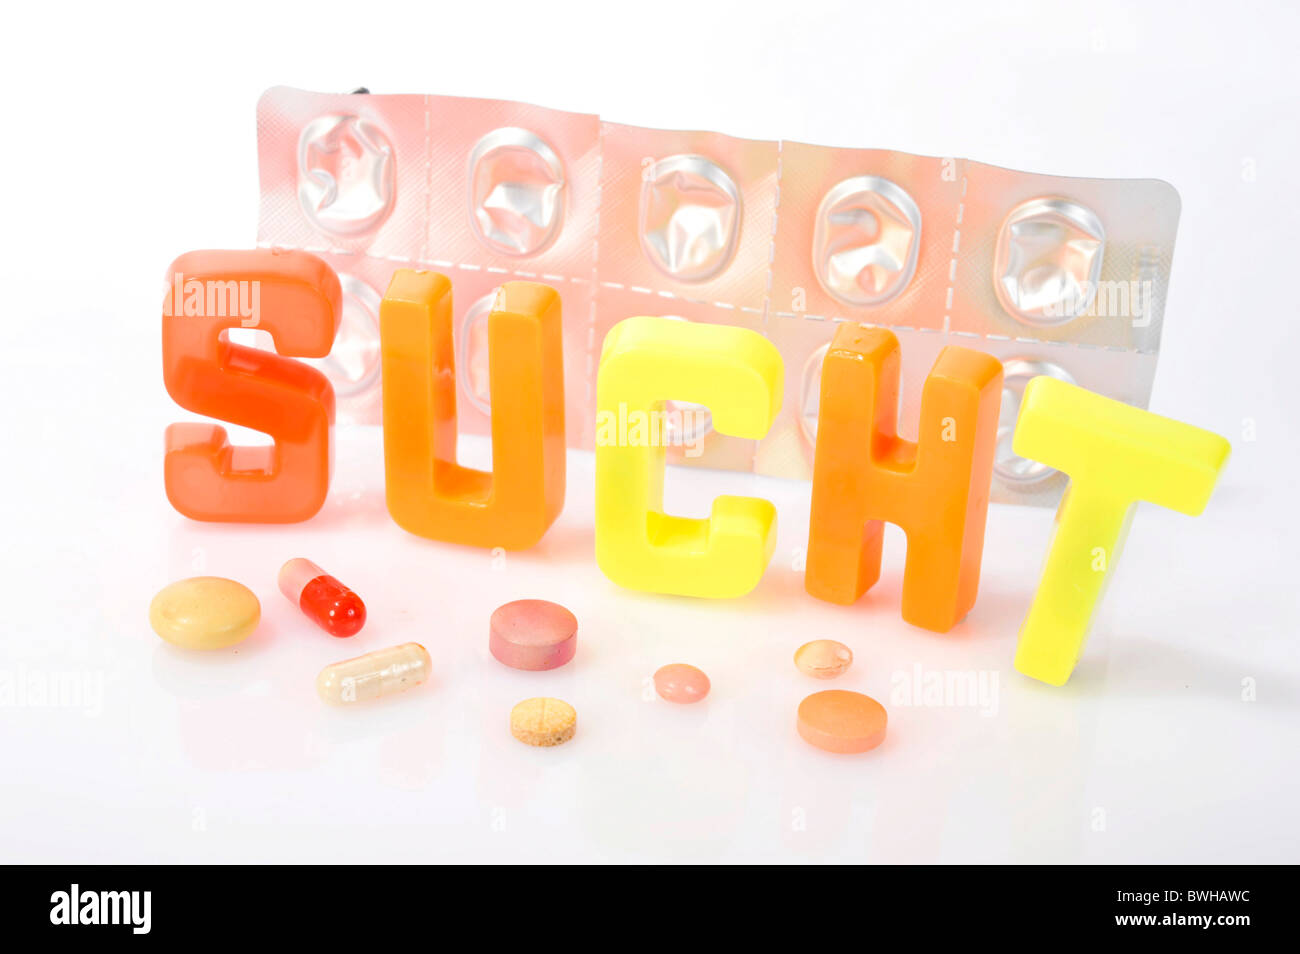 Empty blister package, lettering 'Sucht', German for 'addiction', symbolic image for drug addiction Stock Photo